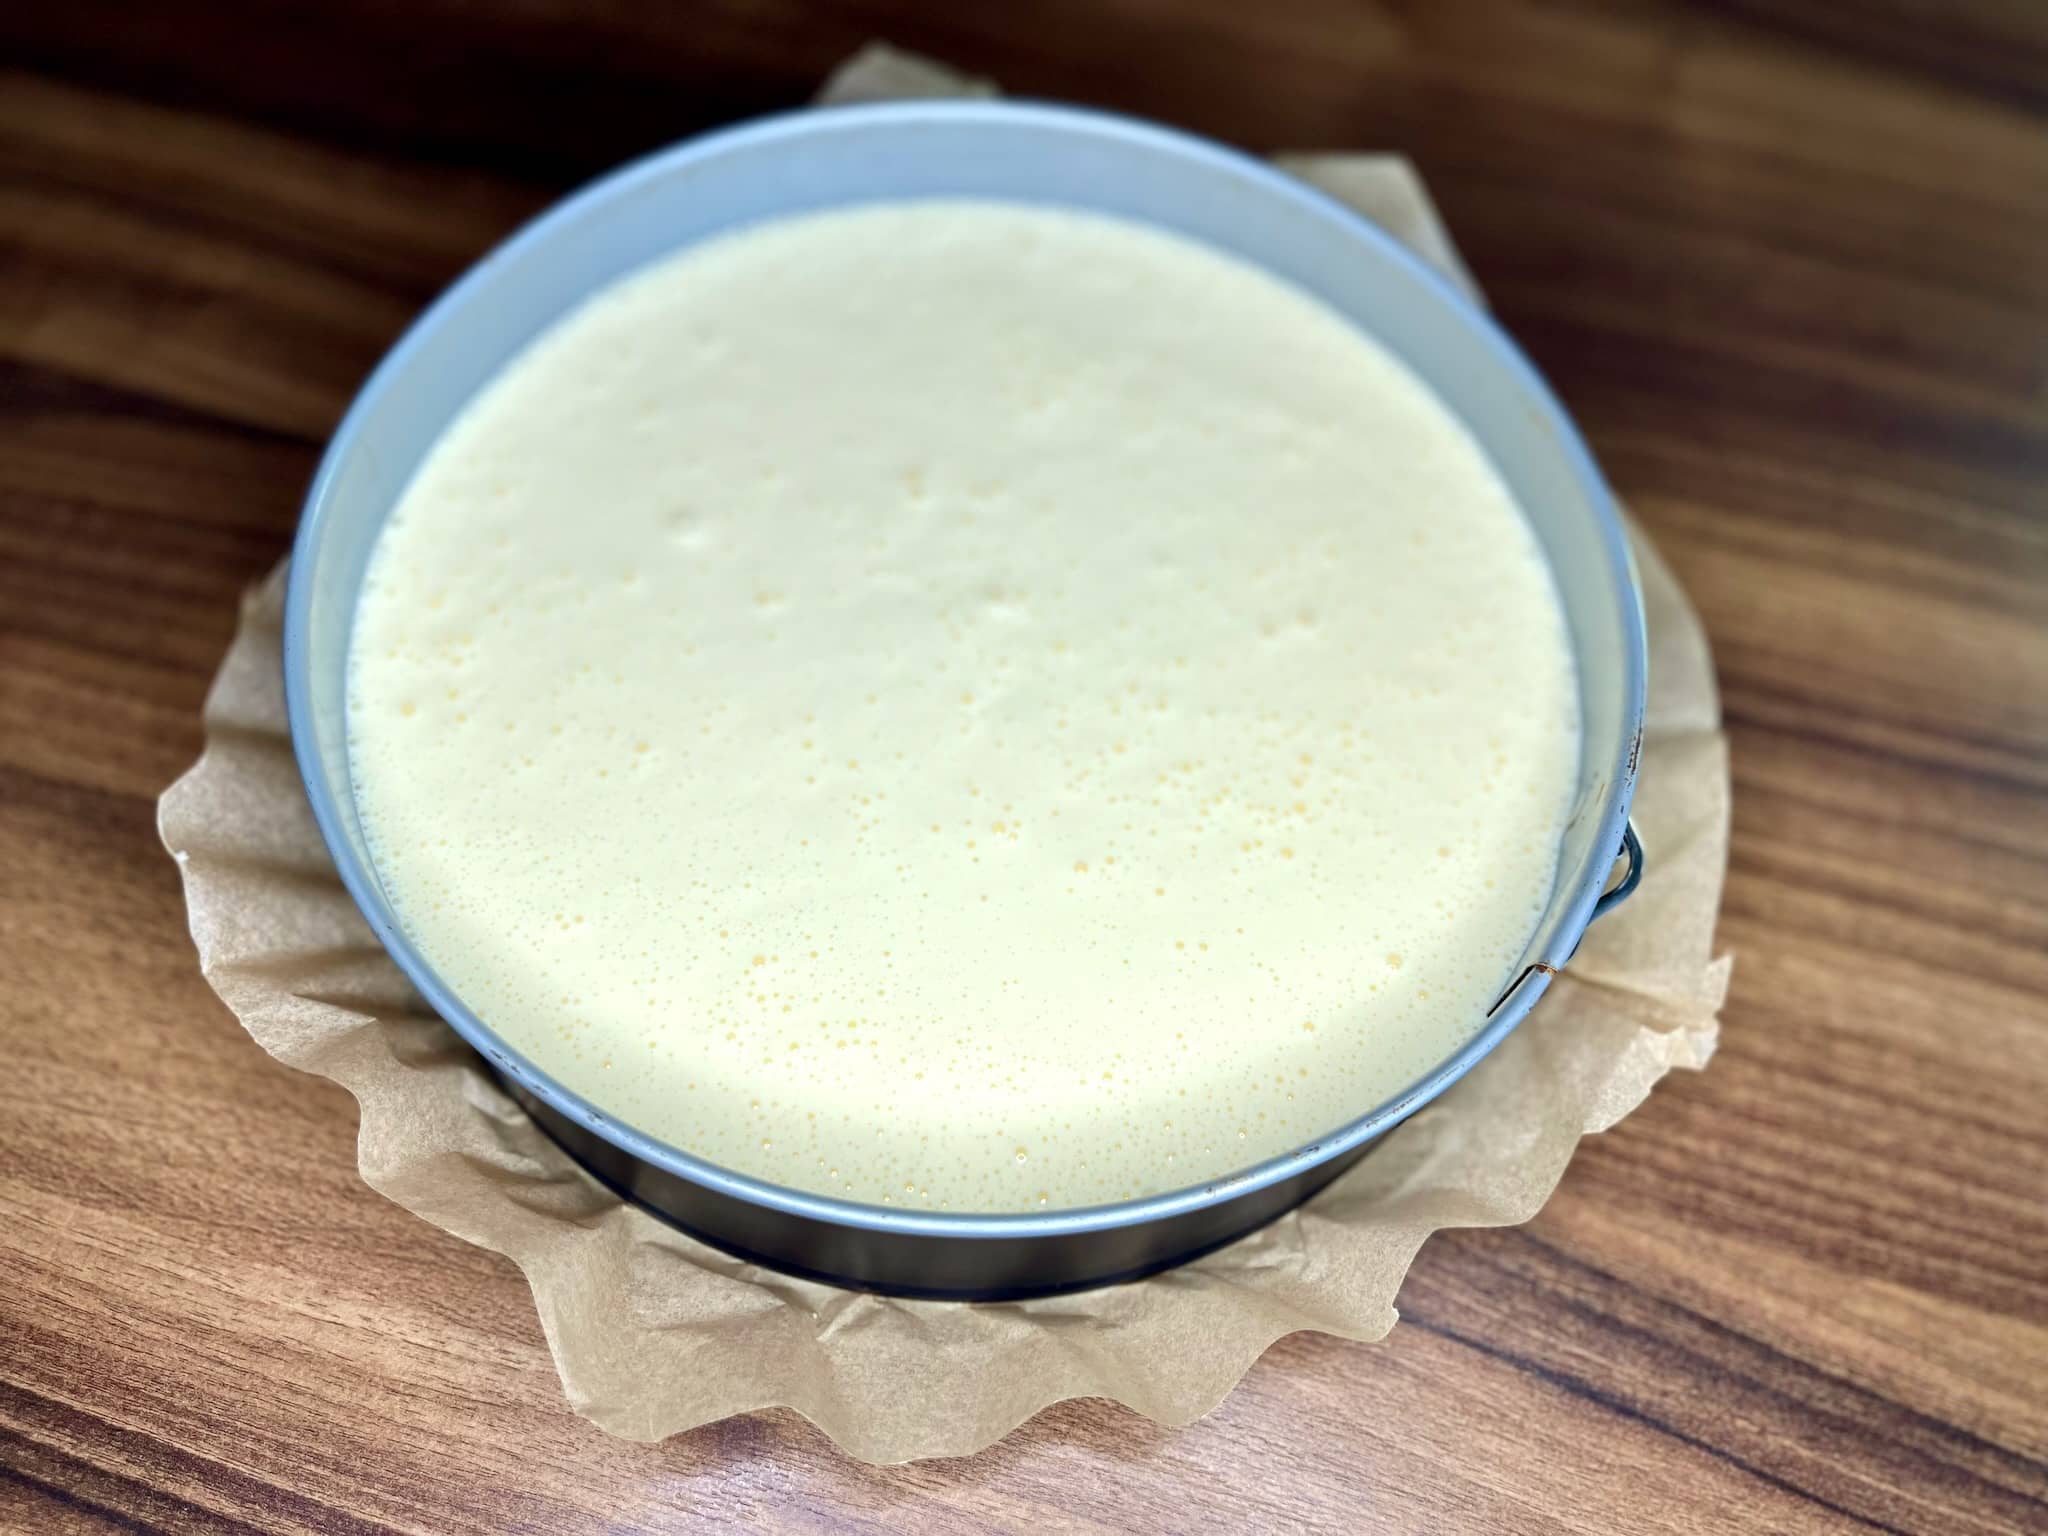 Cheesecake batter in a cake tin, ready for the oven